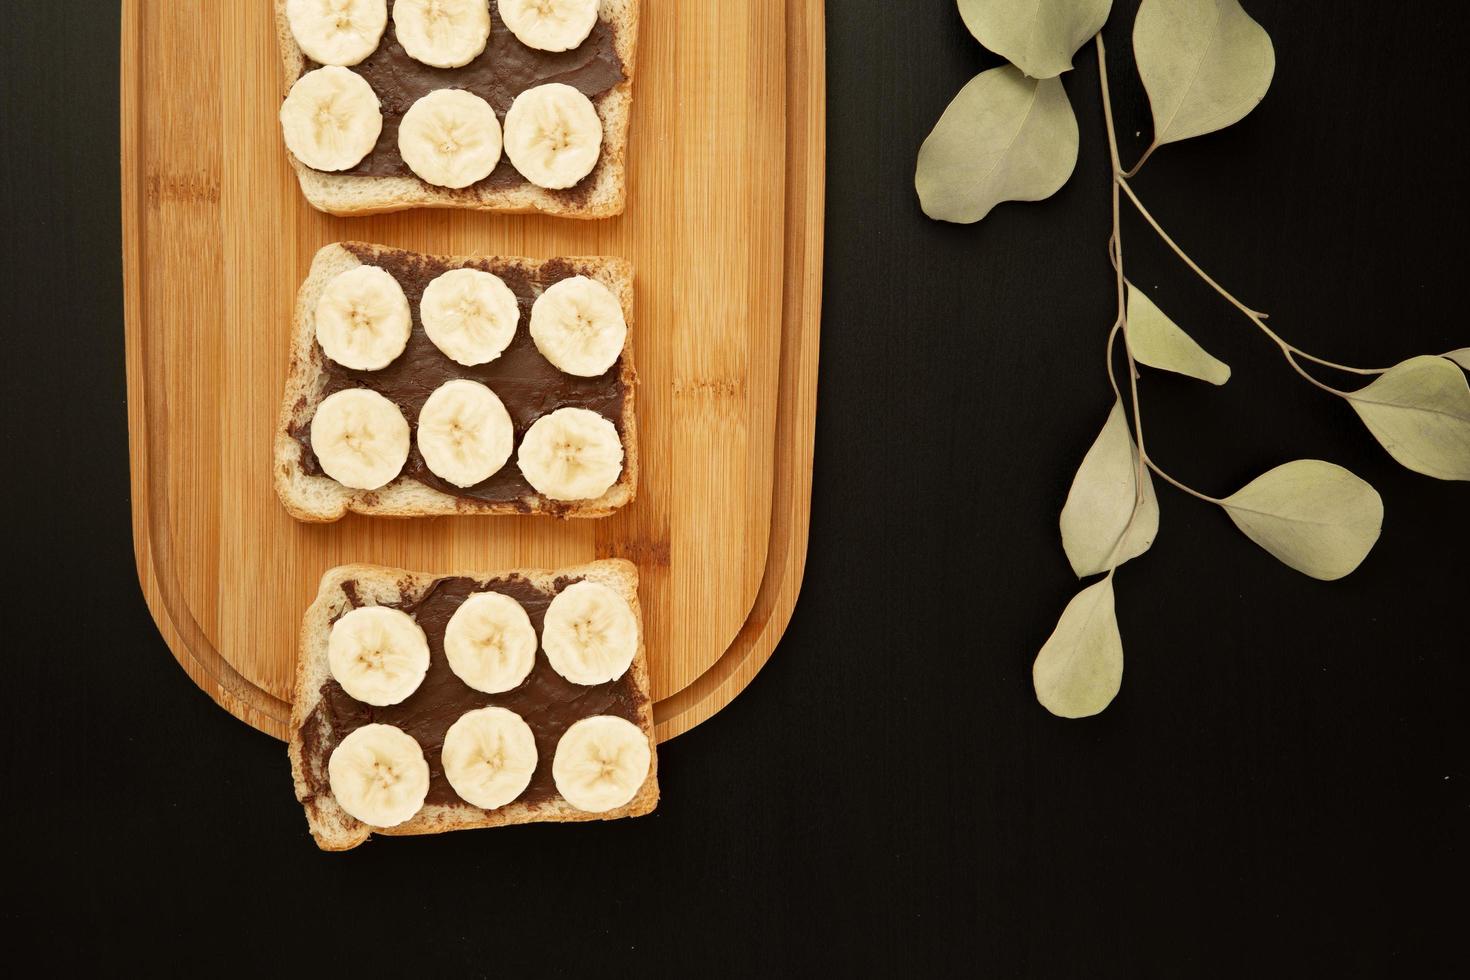 Three banana white bread toasts smeared with chocolate butter on a cutting board against a dark background photo